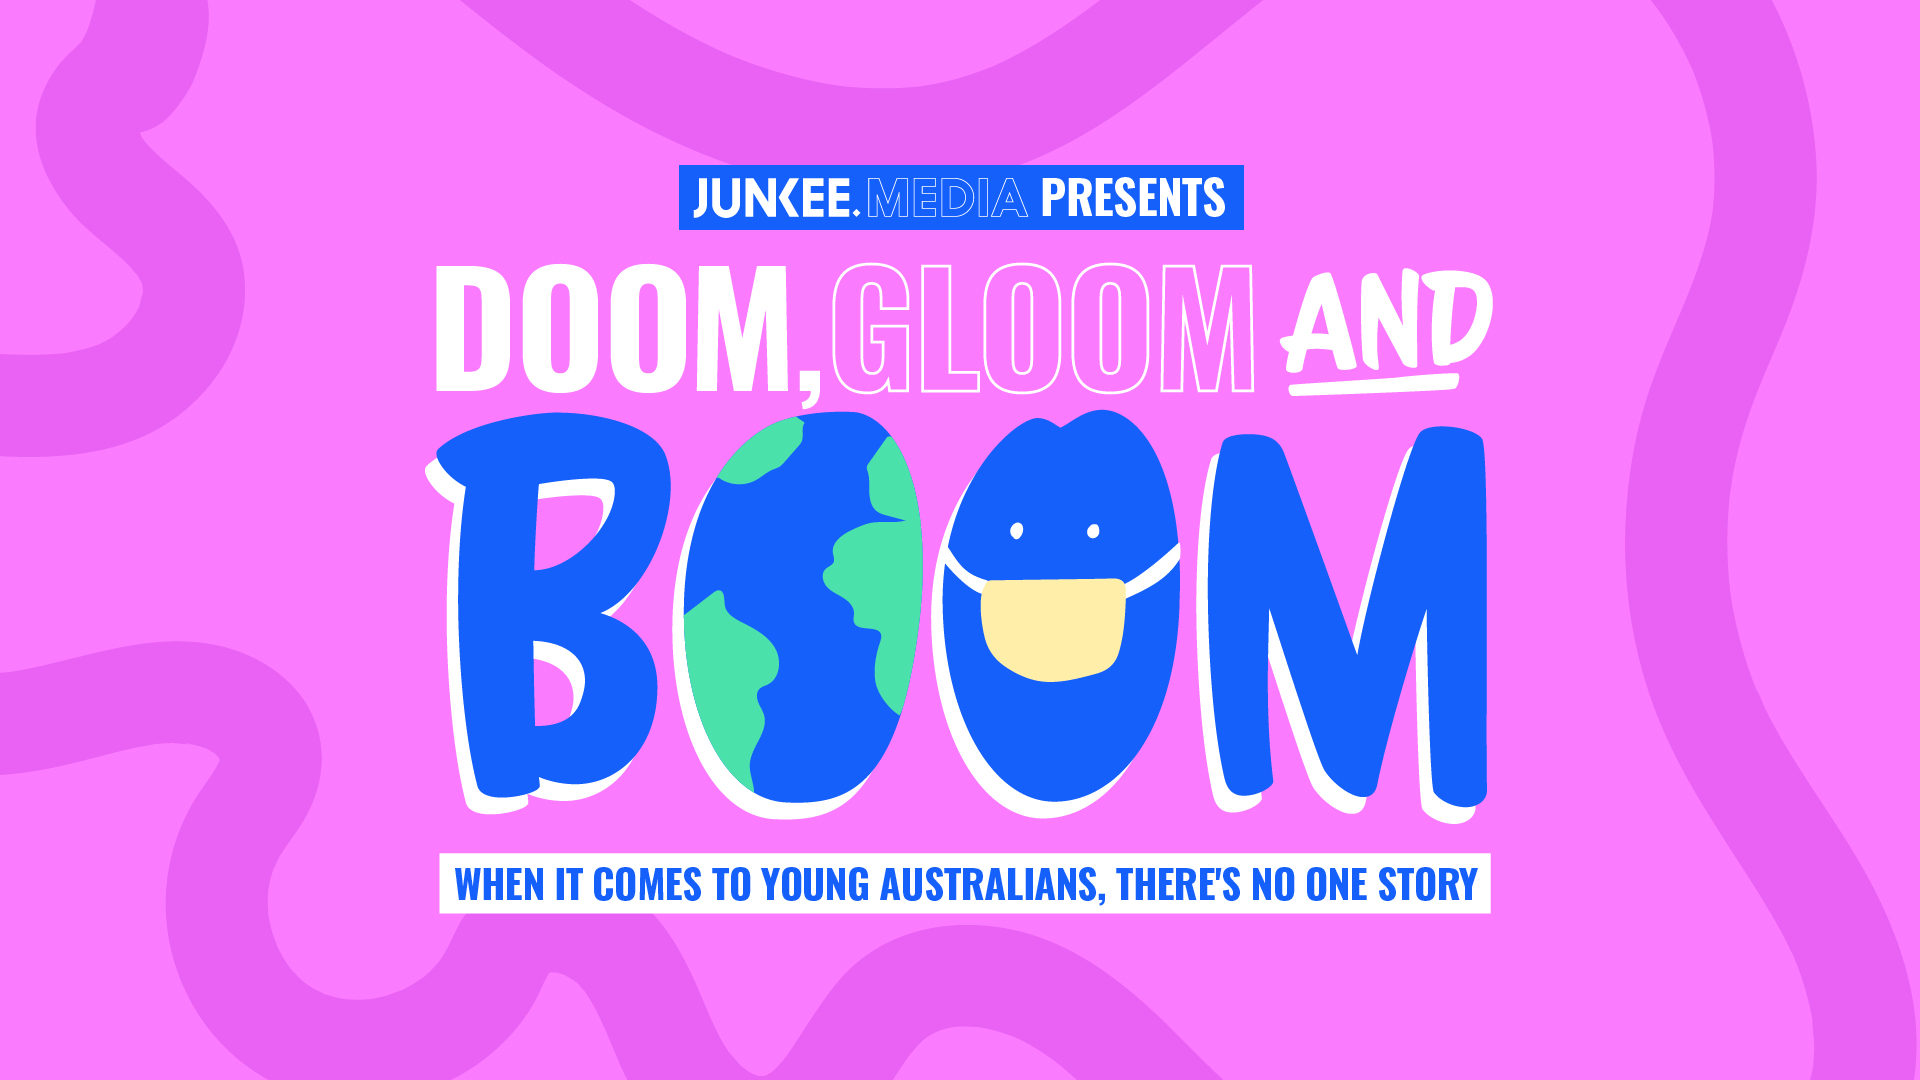 Junkee Youth Research 2020 - Doom, Gloom and Boom